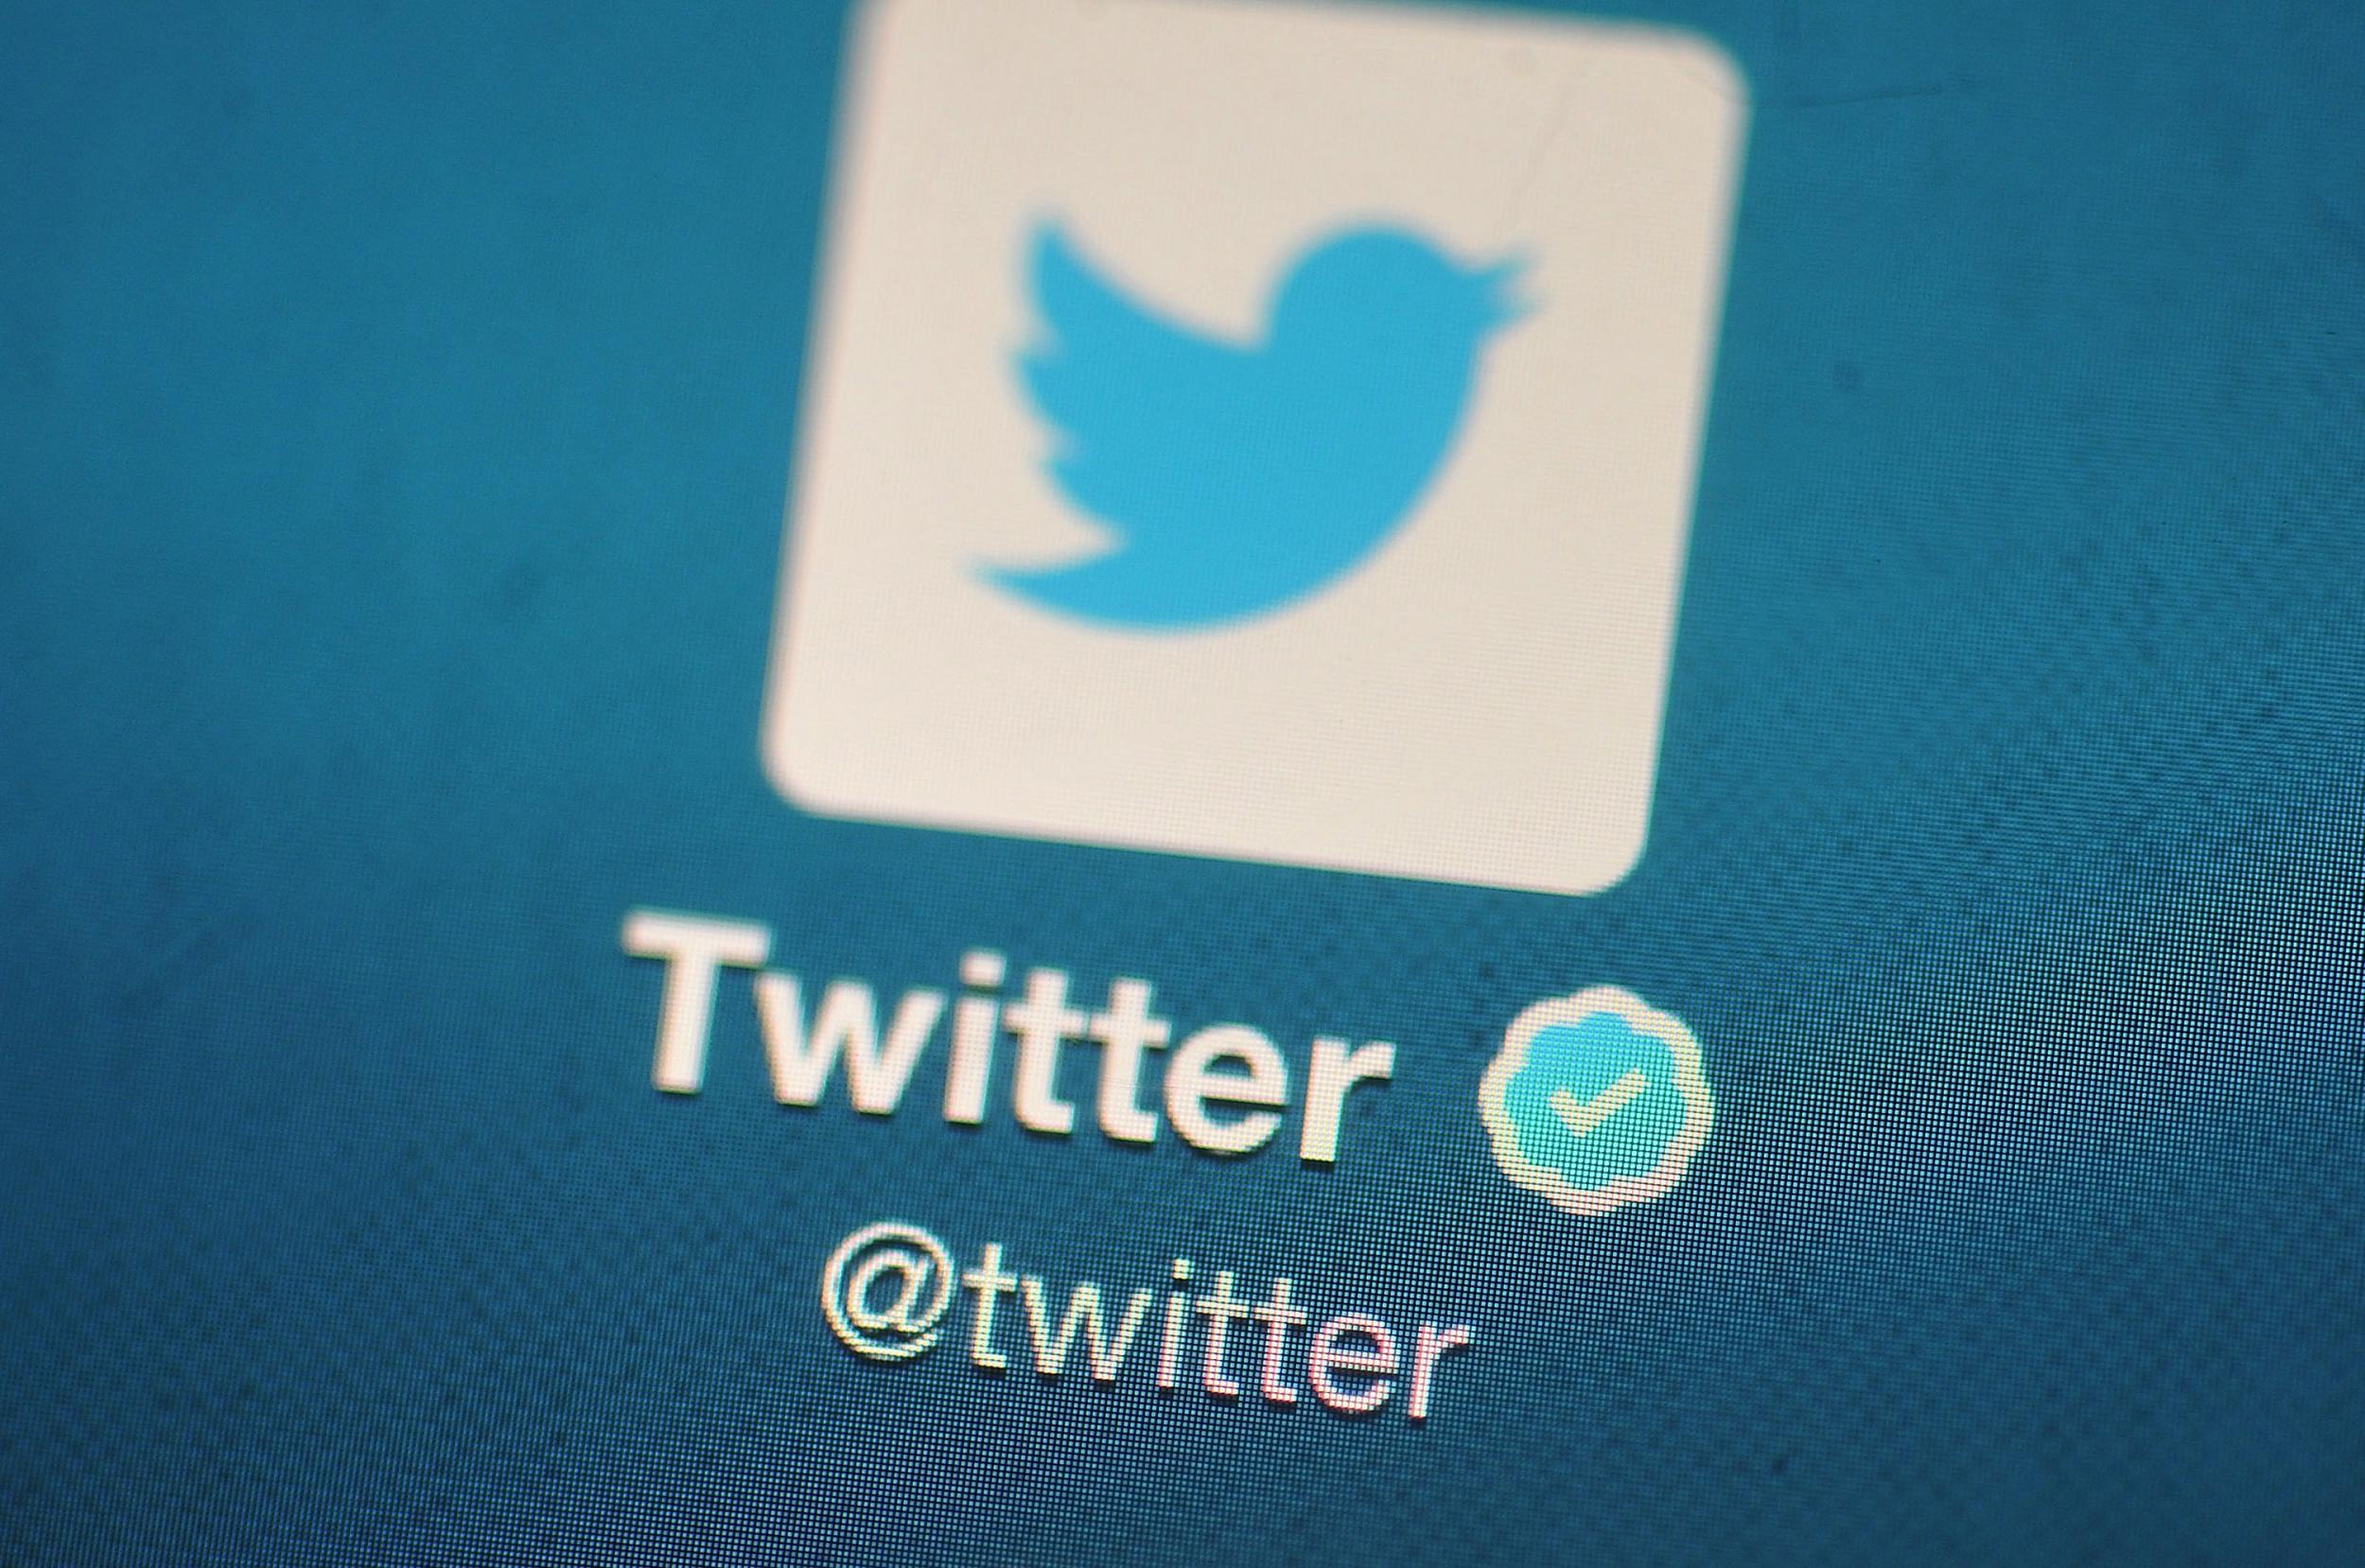 Twitter carried out the trial on a limited number of users